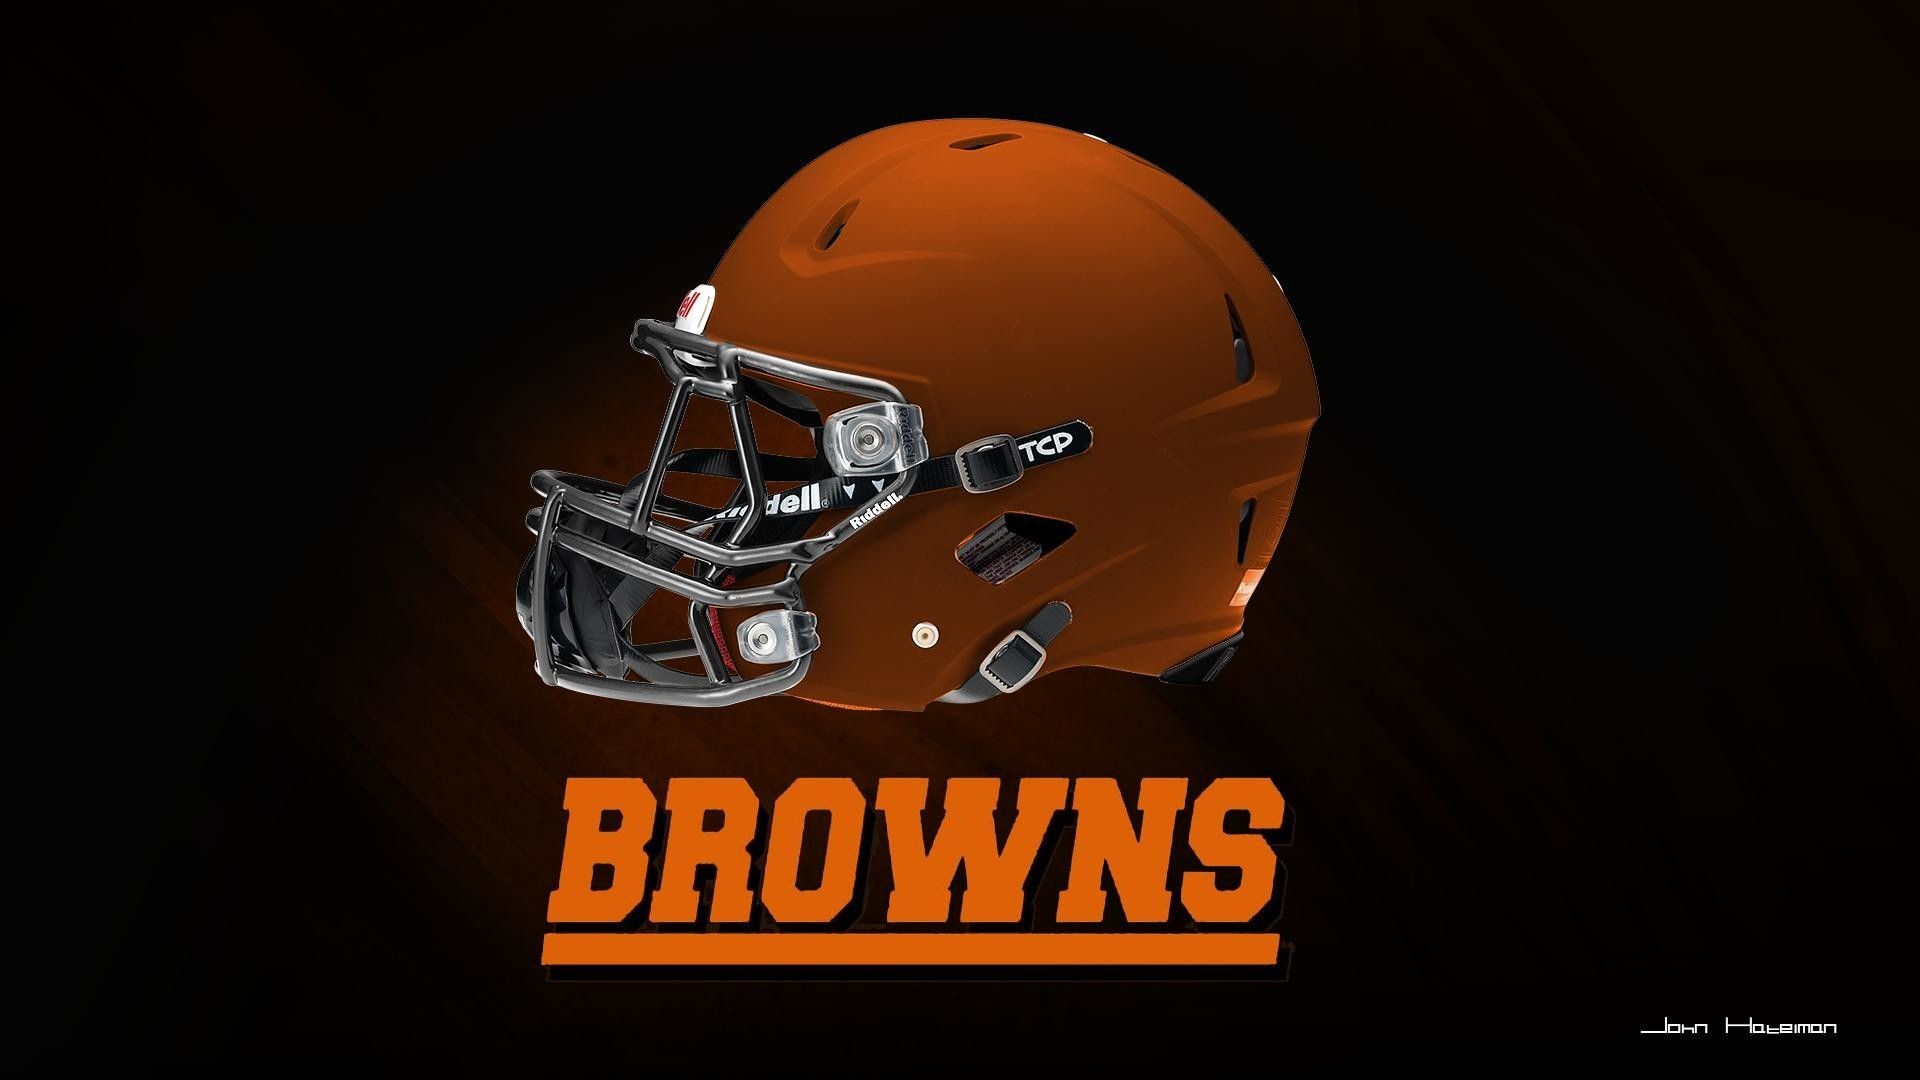 1920x1080 Cleveland Browns Schedule 2018 Wallpaper (73+ images)